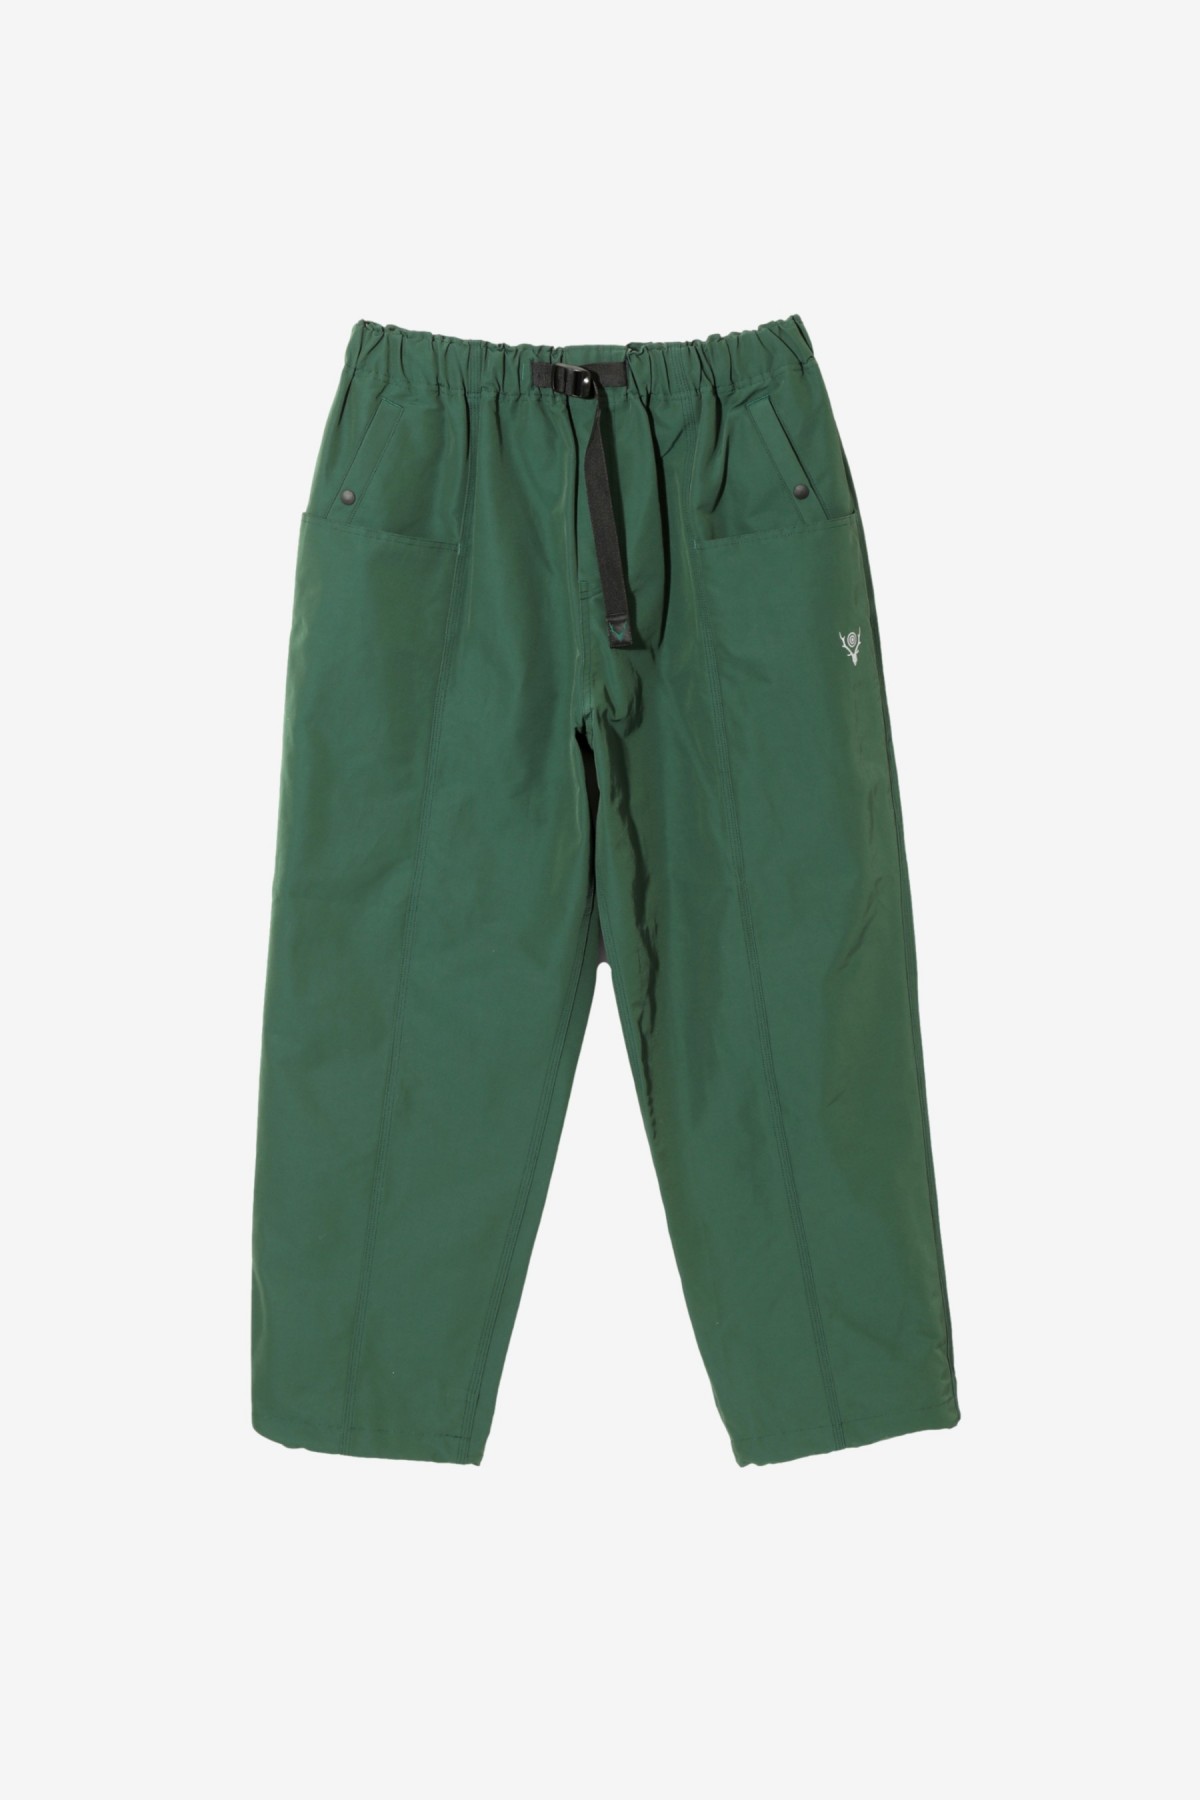 South2 West8 Belted C.S. Pant Grosgrain in Green